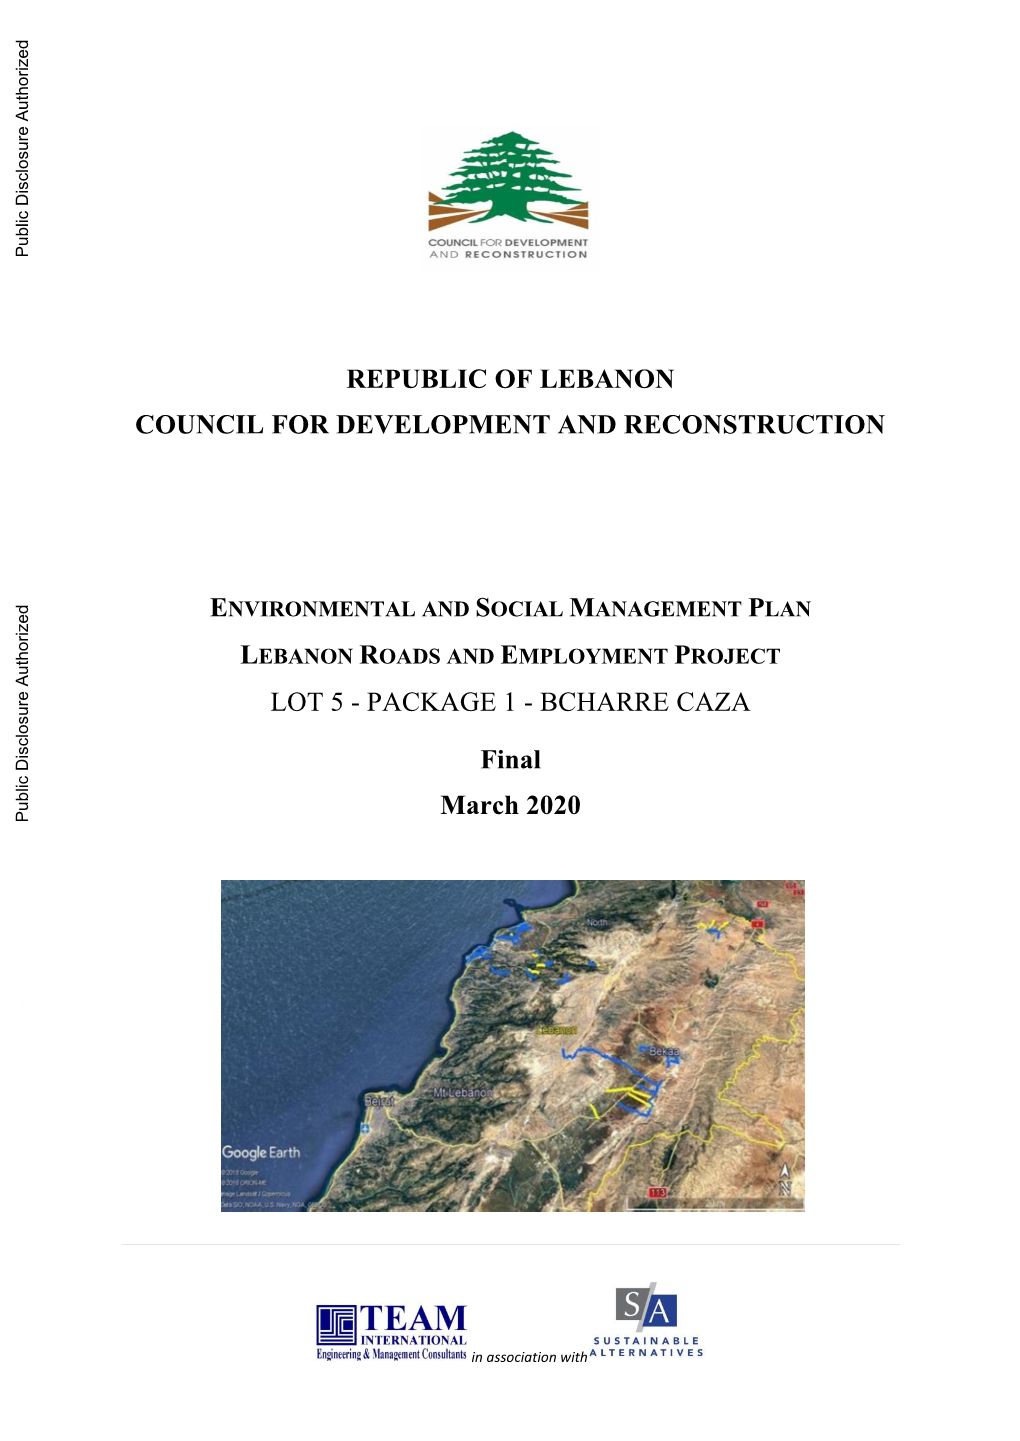 Republic of Lebanon Council for Development and Reconstruction